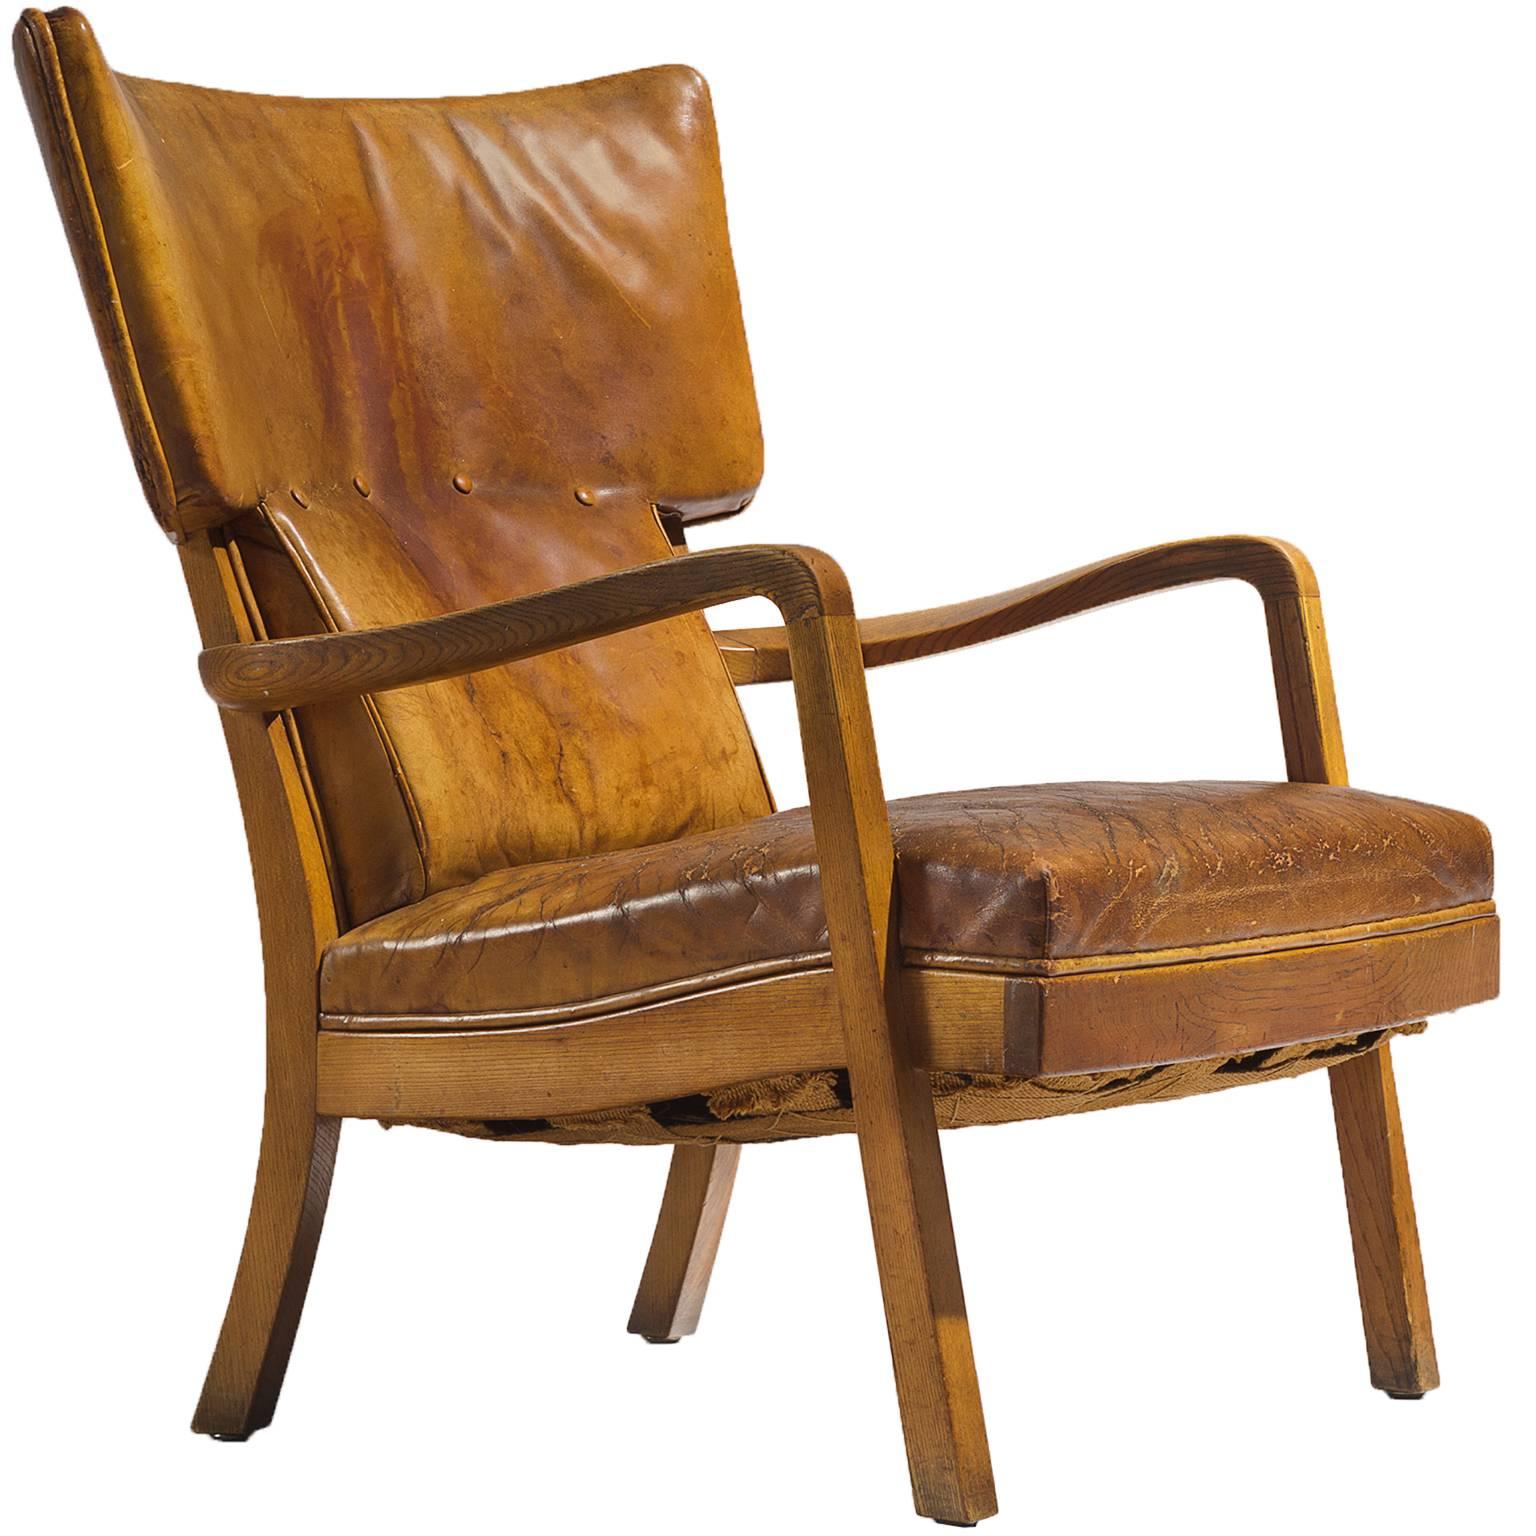 Peter Hvidt Unique Early Wingback Chair in Cognac Leather